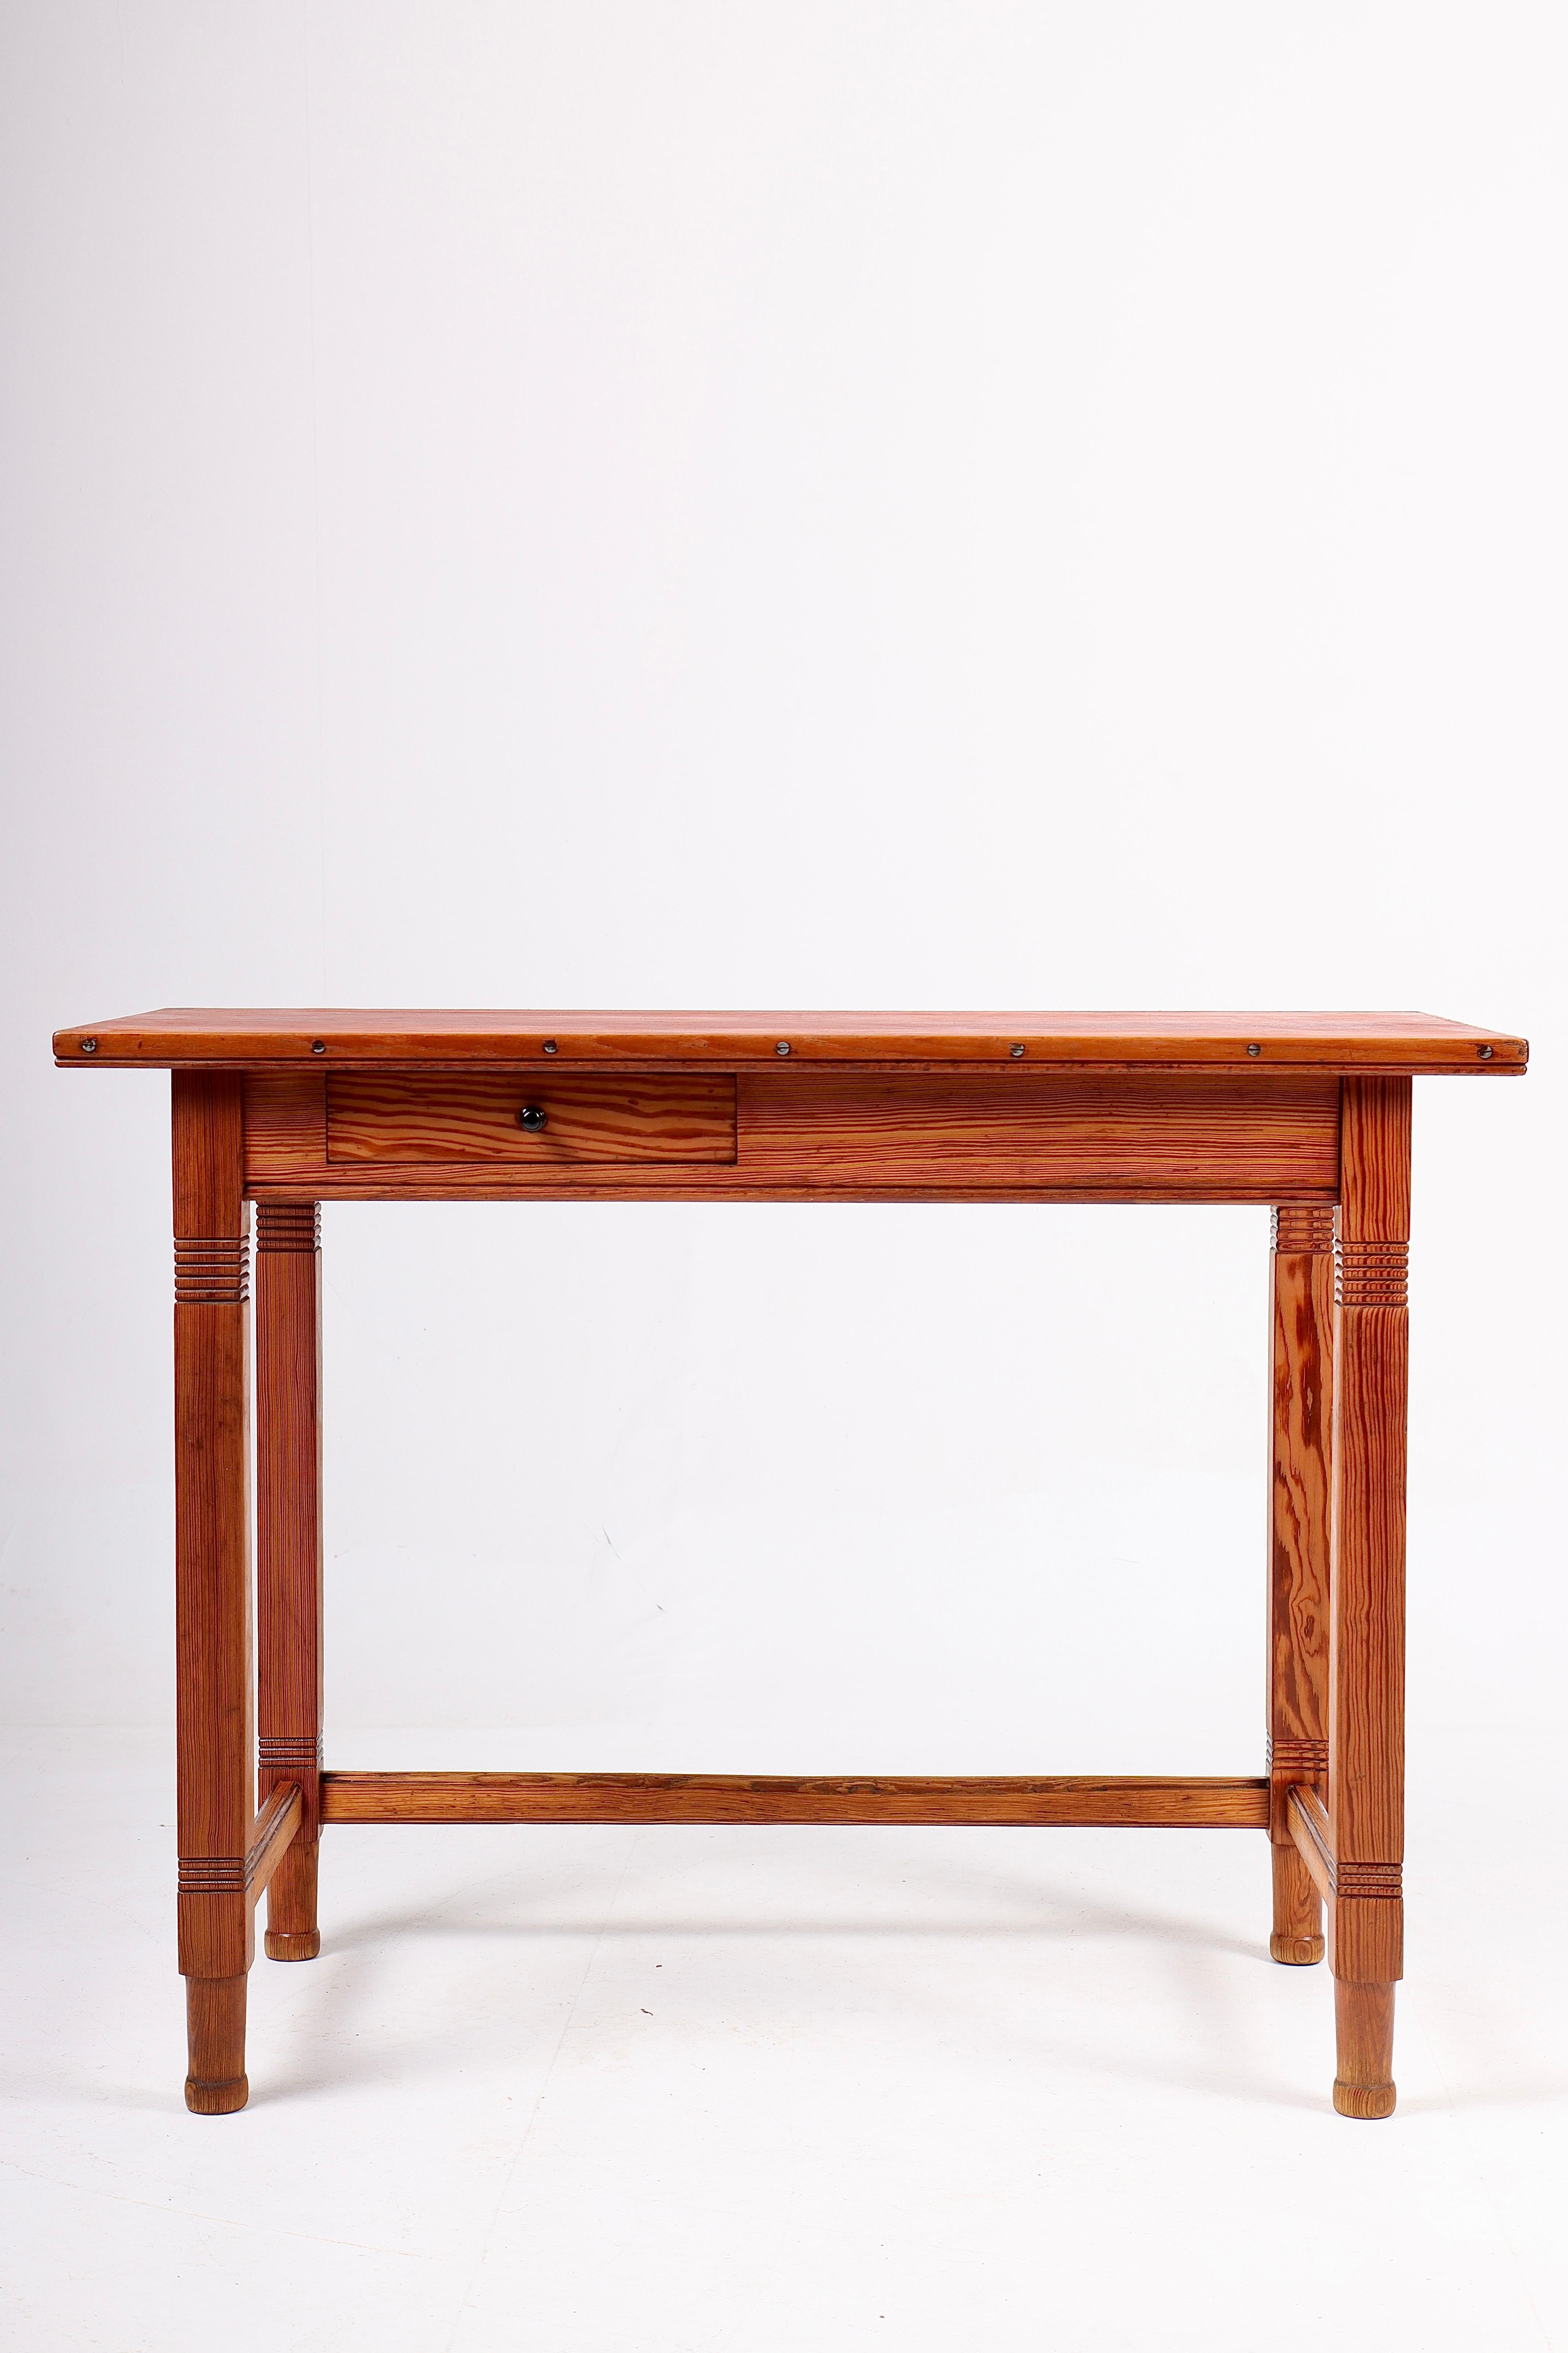 Early 20th Century Desk Pine and Patinated Leather Designed by Martin Nyrop for Rud Rasmussen